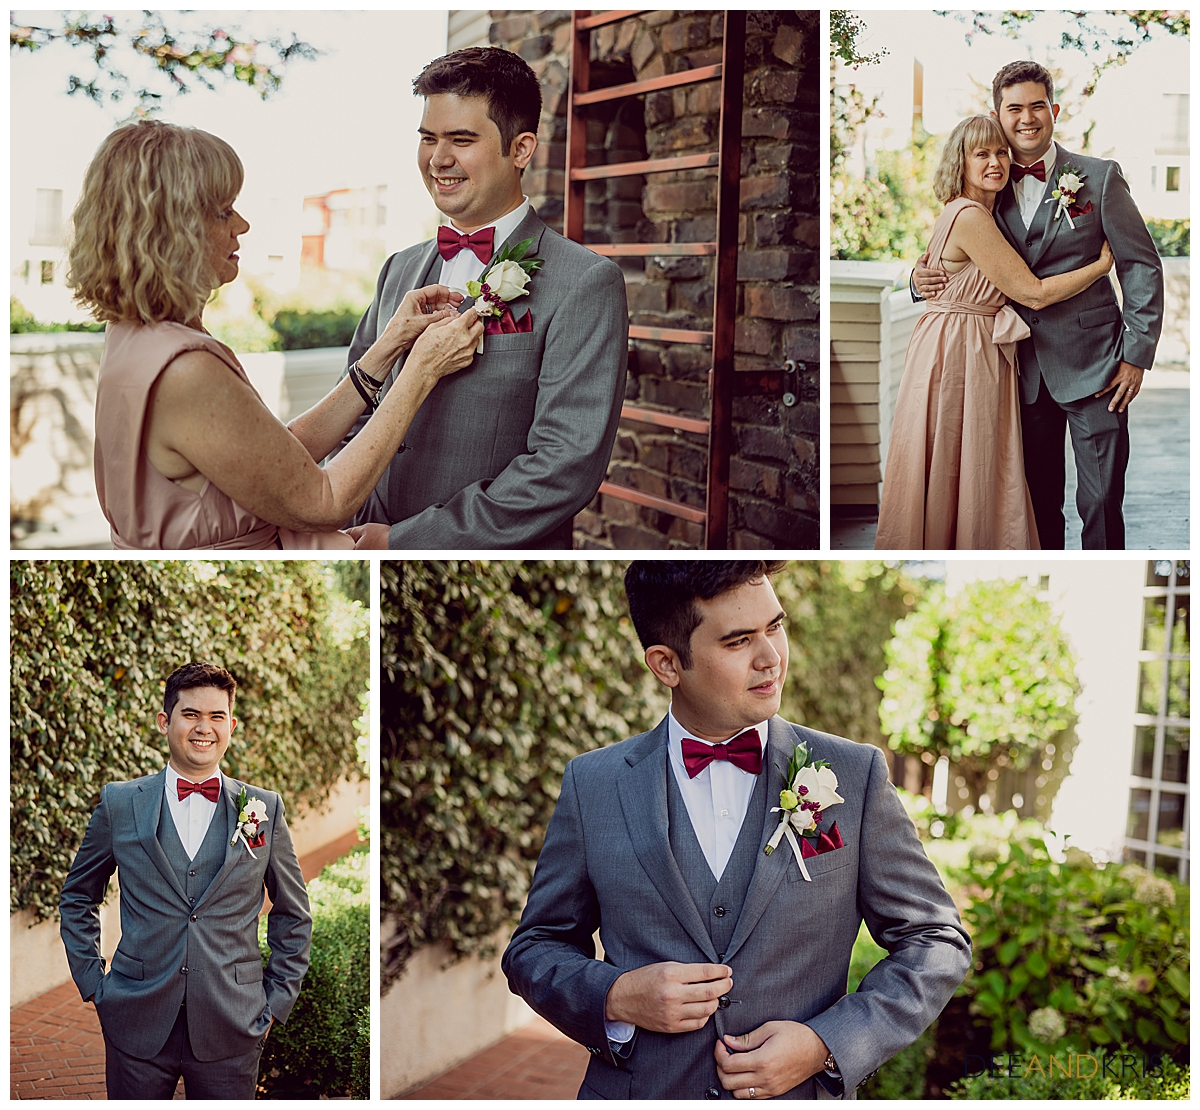 Four images of groom with his mother as she puts on his boutonniere.